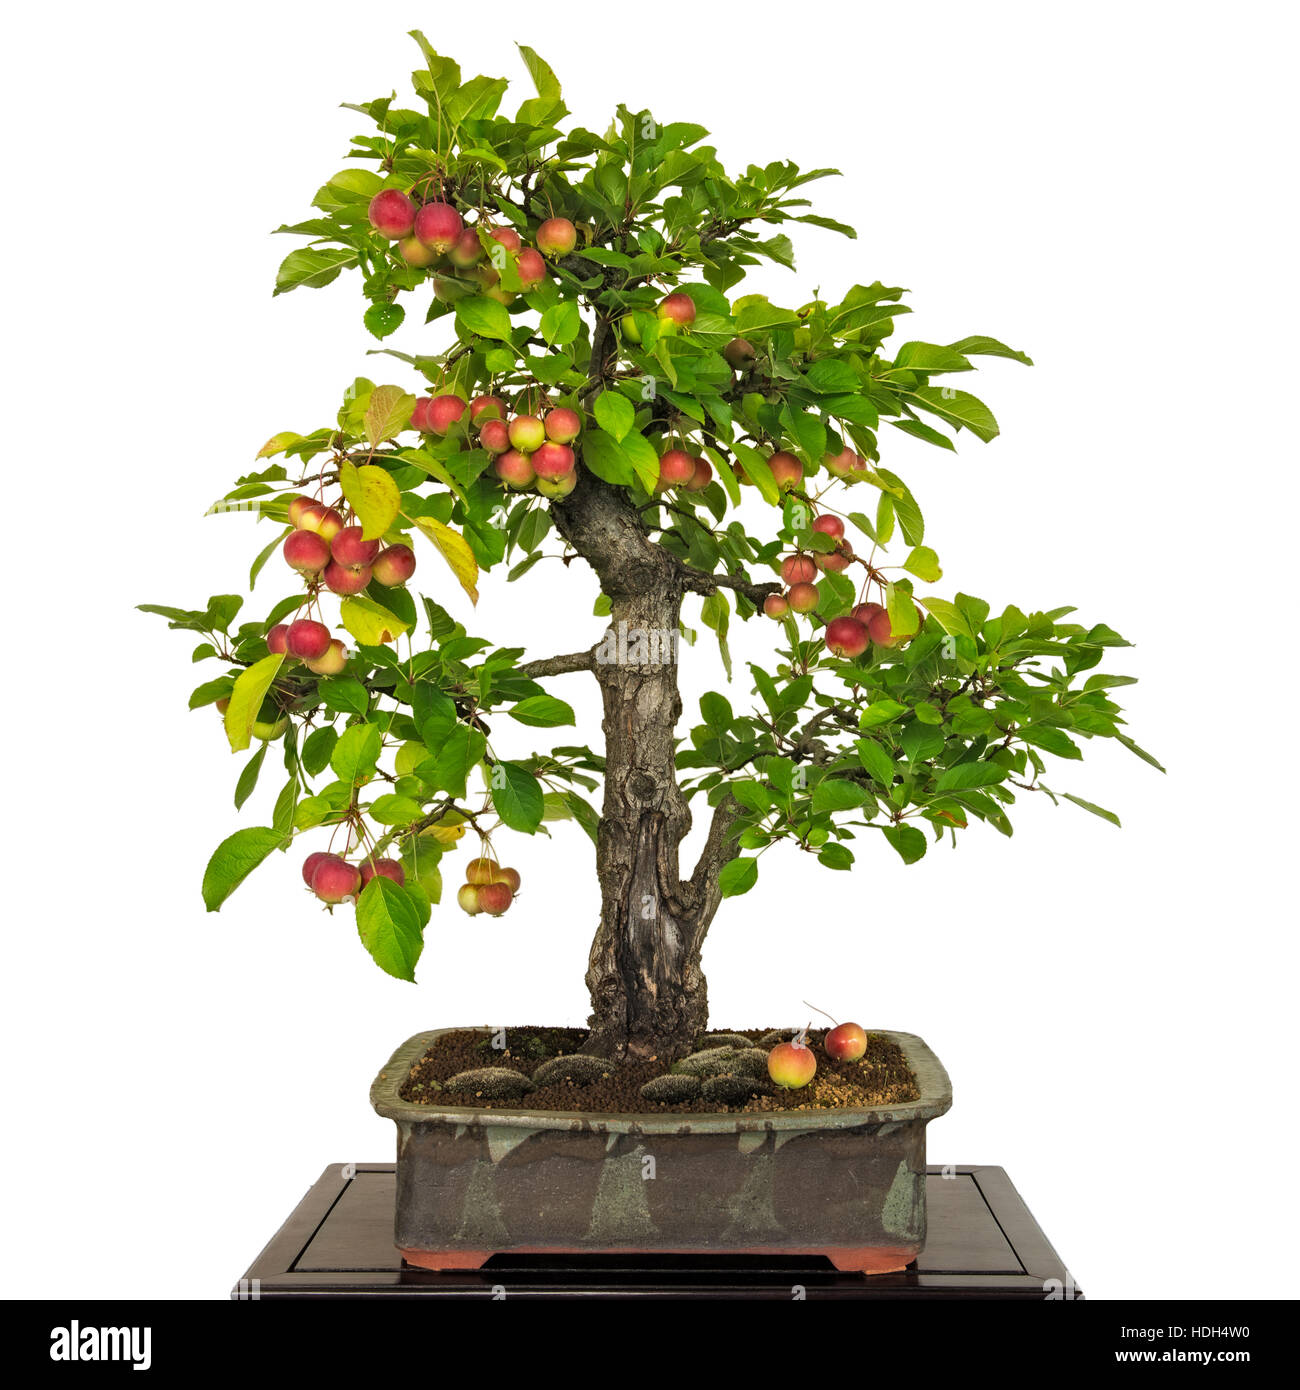 Bonsai apple tree (Malus) with red apples and green foliage Stock Photo